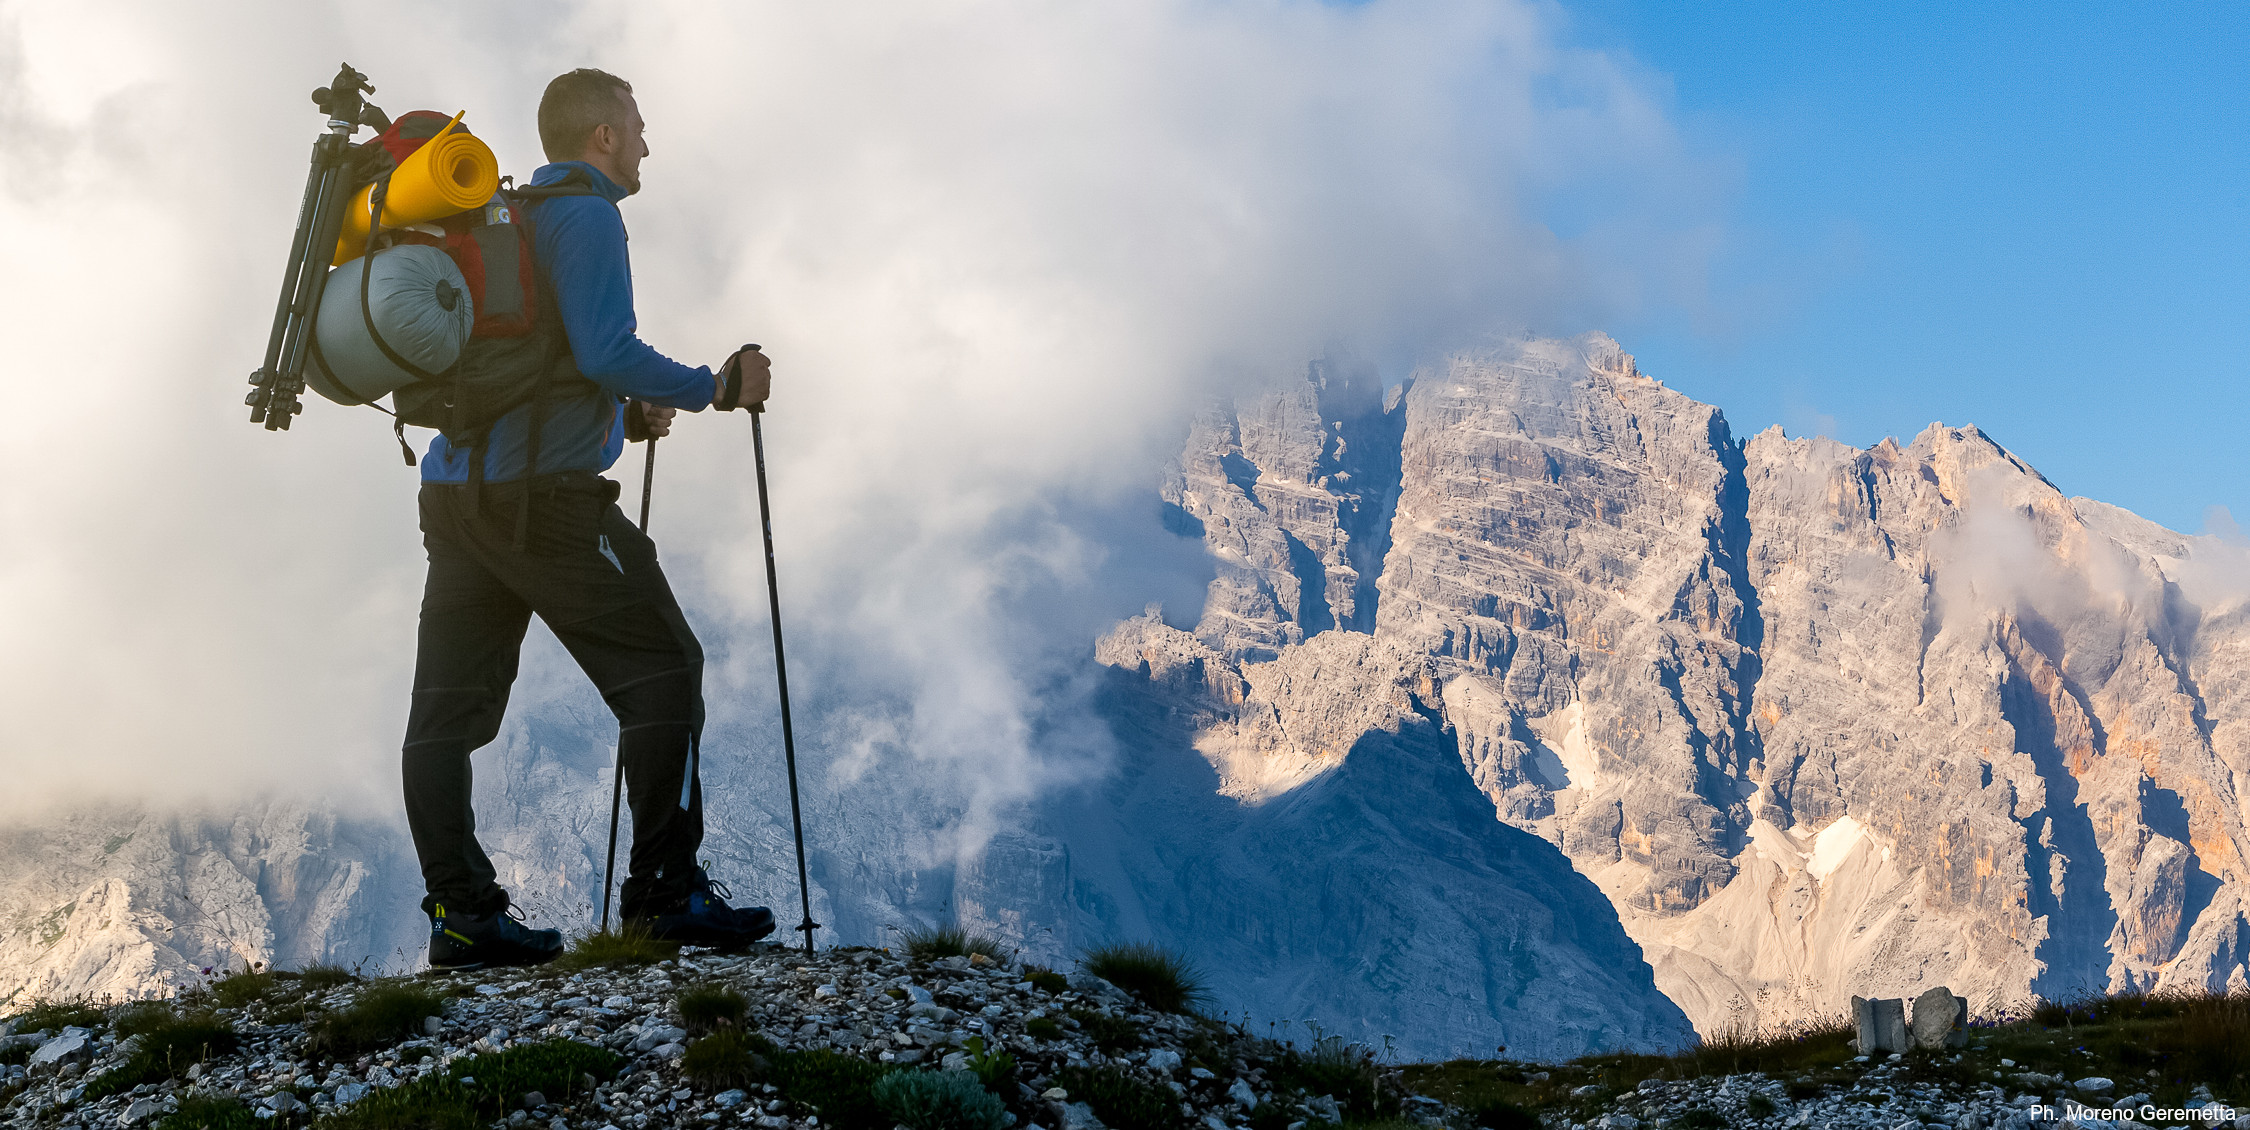 Dolomiti UNESCO feed. Pictured: a hiker in front of Monte Cristallo